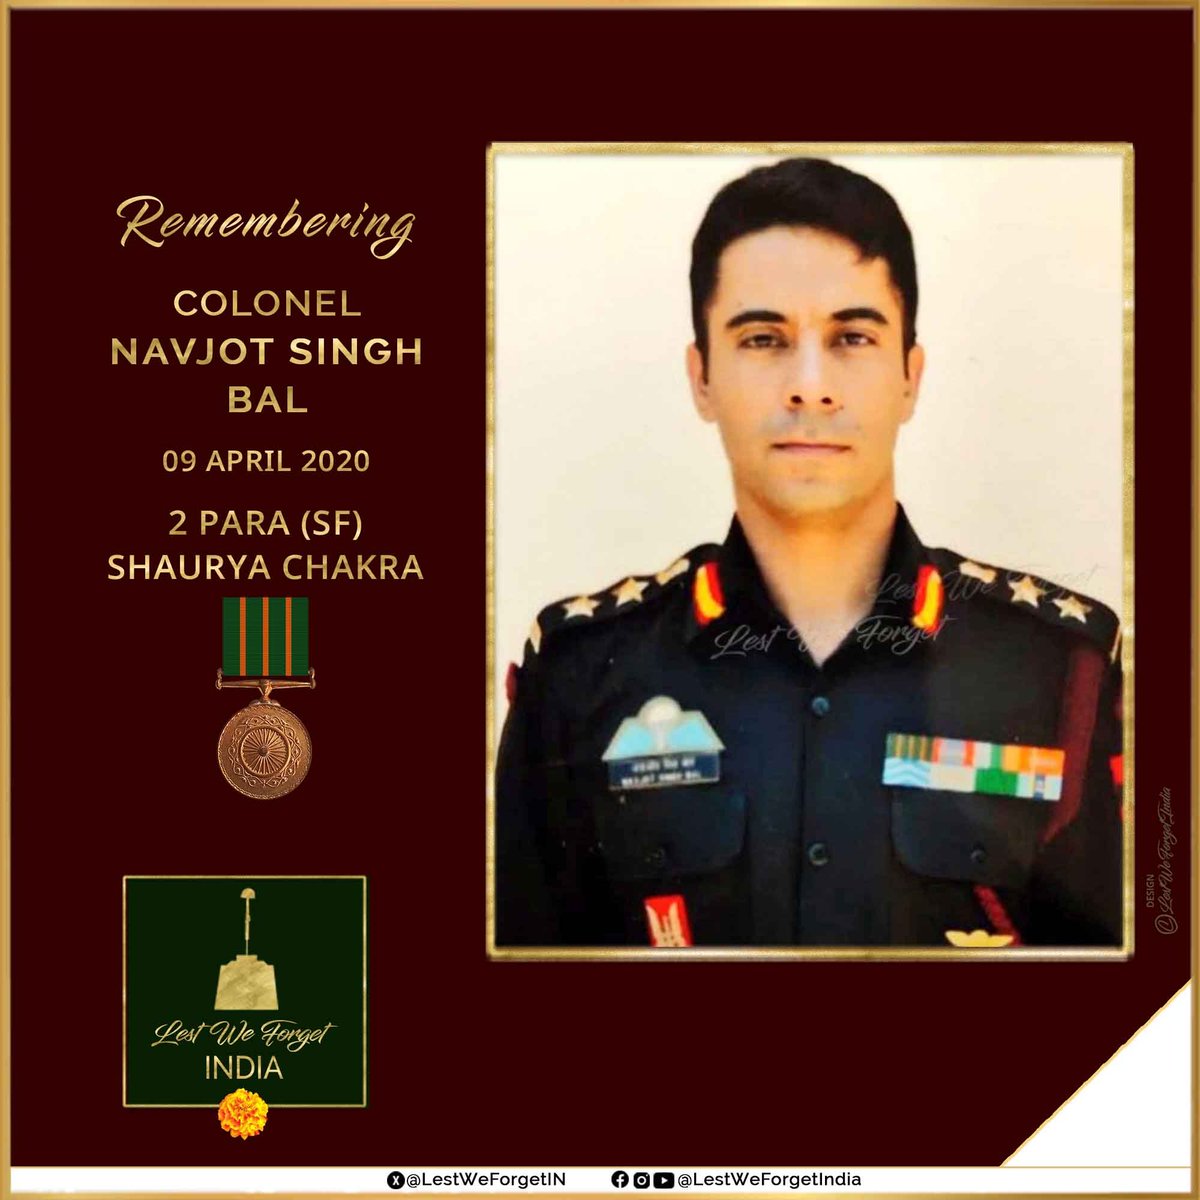 Remembering the extraordinary life of a gallant #IndianBrave on his 4th death anniversary today. #LestWeForgetIndia🇮🇳 Colonel Navjot Singh Bal, #ShauryaChakra, former CO 2 PARA (SF) lost his life to cancer, #OnThisDay 09 April in 2020, in Bengaluru. He was 39 years old. Hailing…